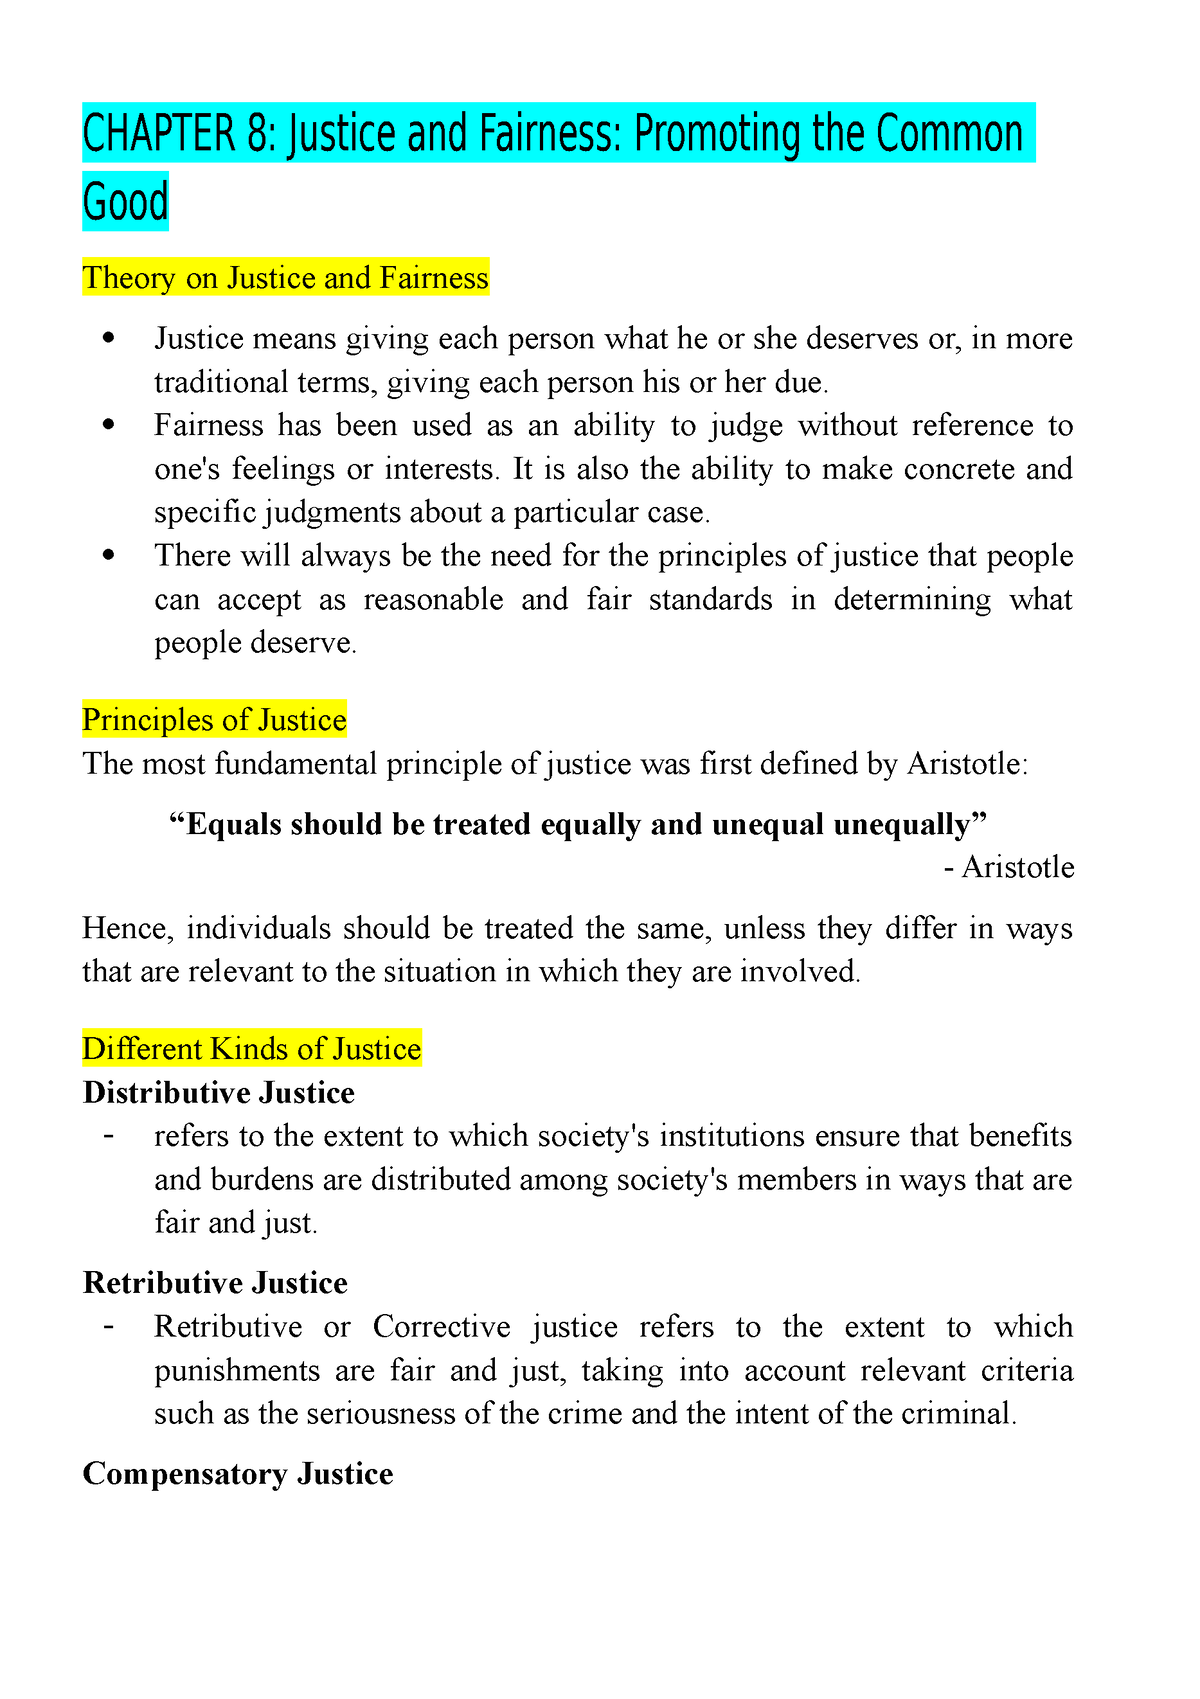 essay about justice and fairness